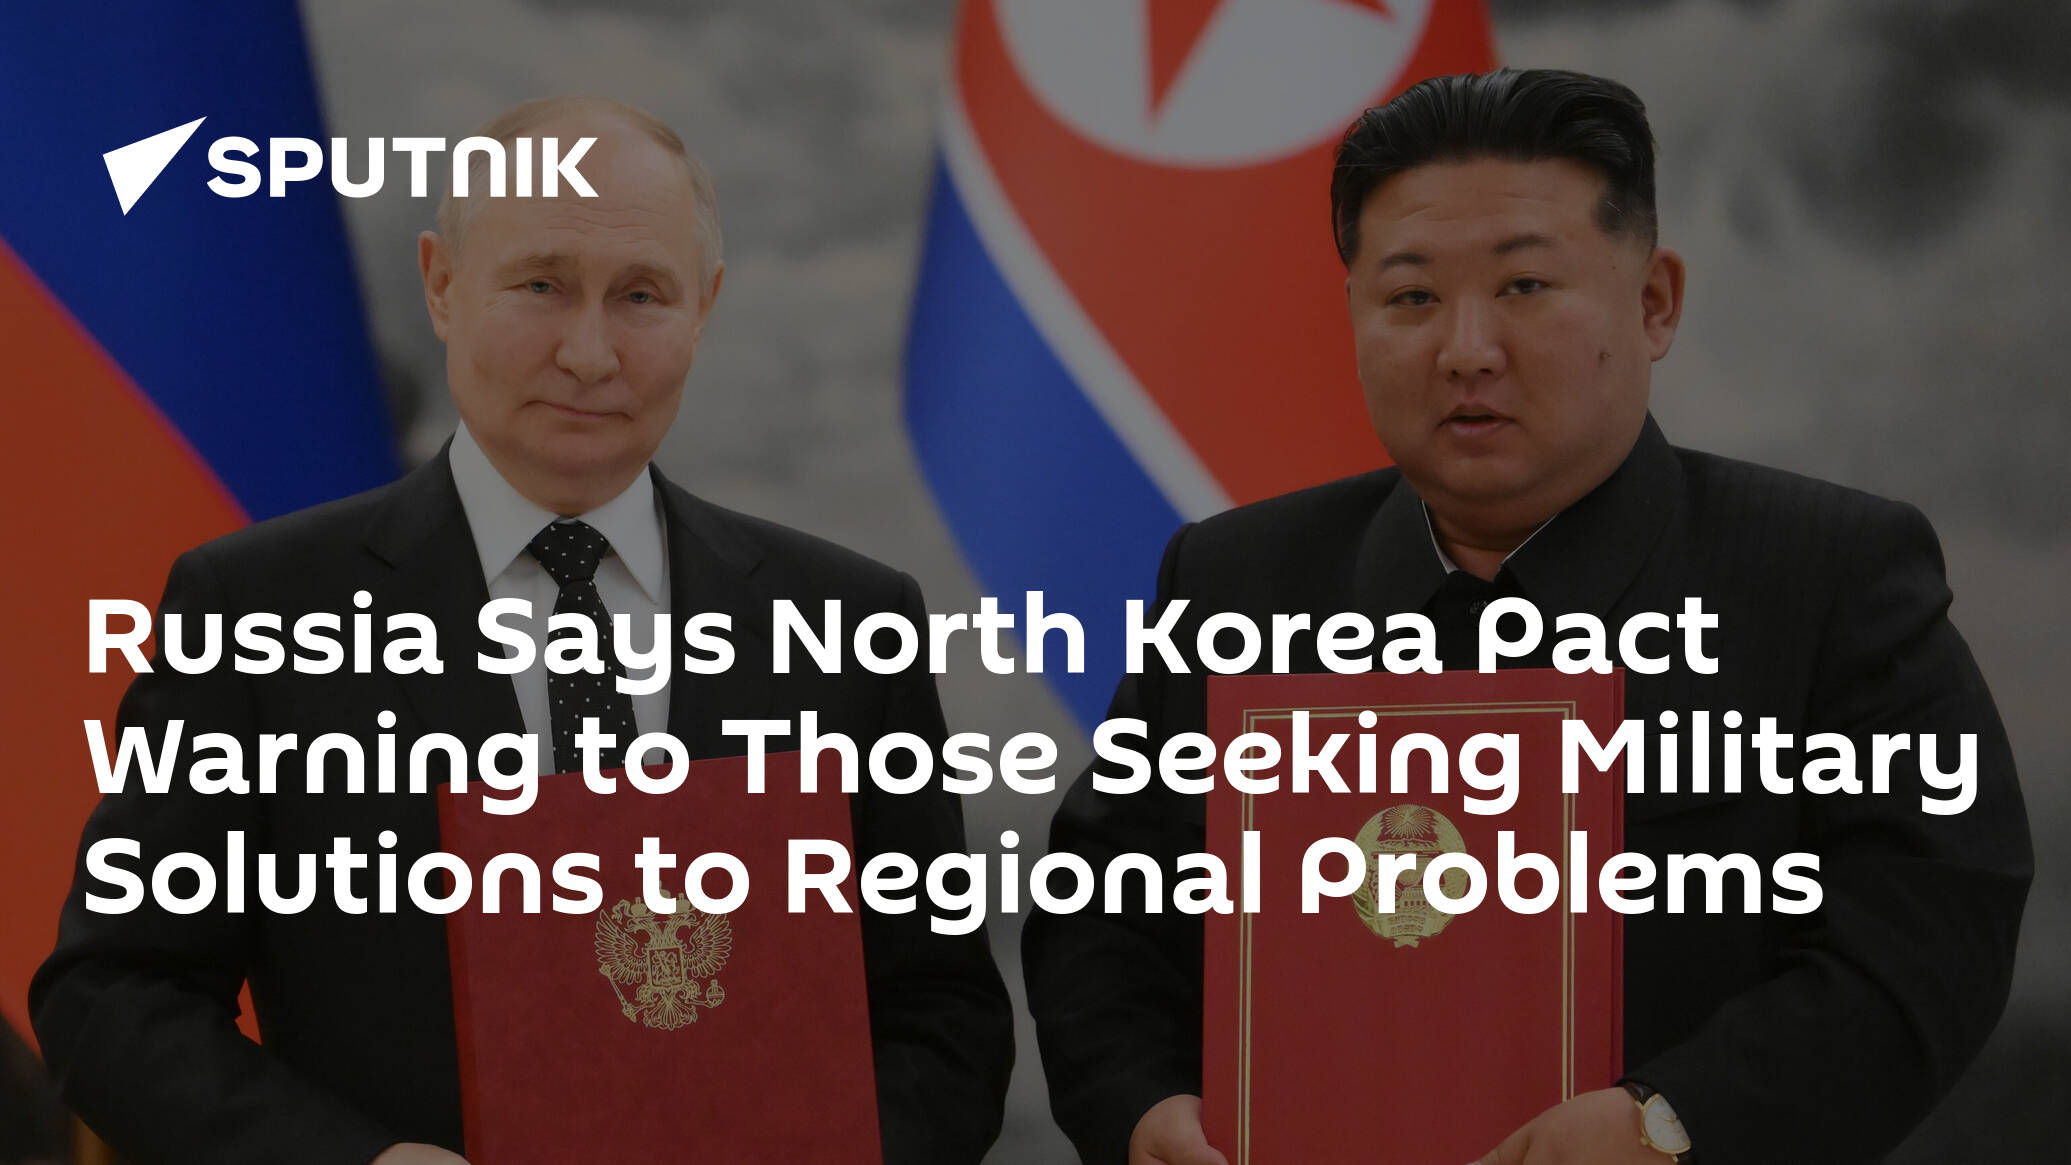 Russia Calls Treaty With N Korea Warning for Those Solving Regional Problems Via Military